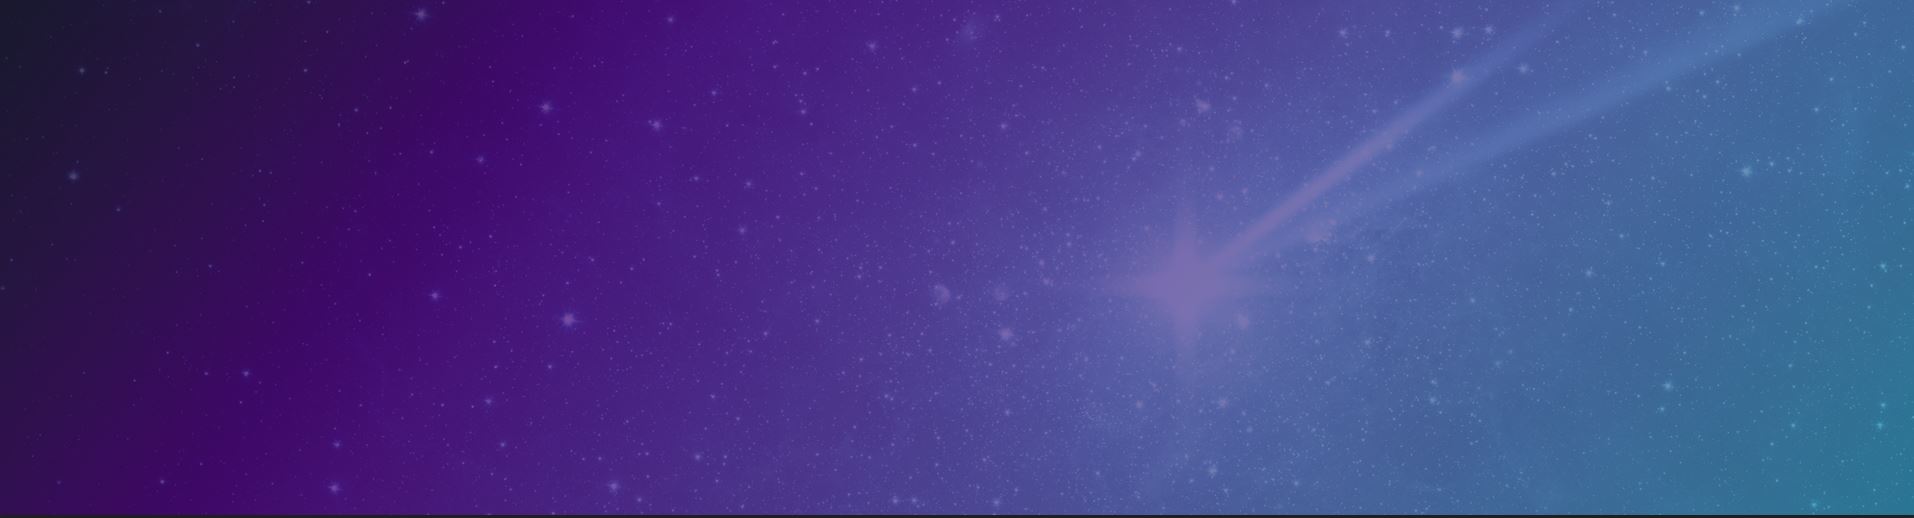 Why We Partner with HP hero banner showing night sky with stars and comet